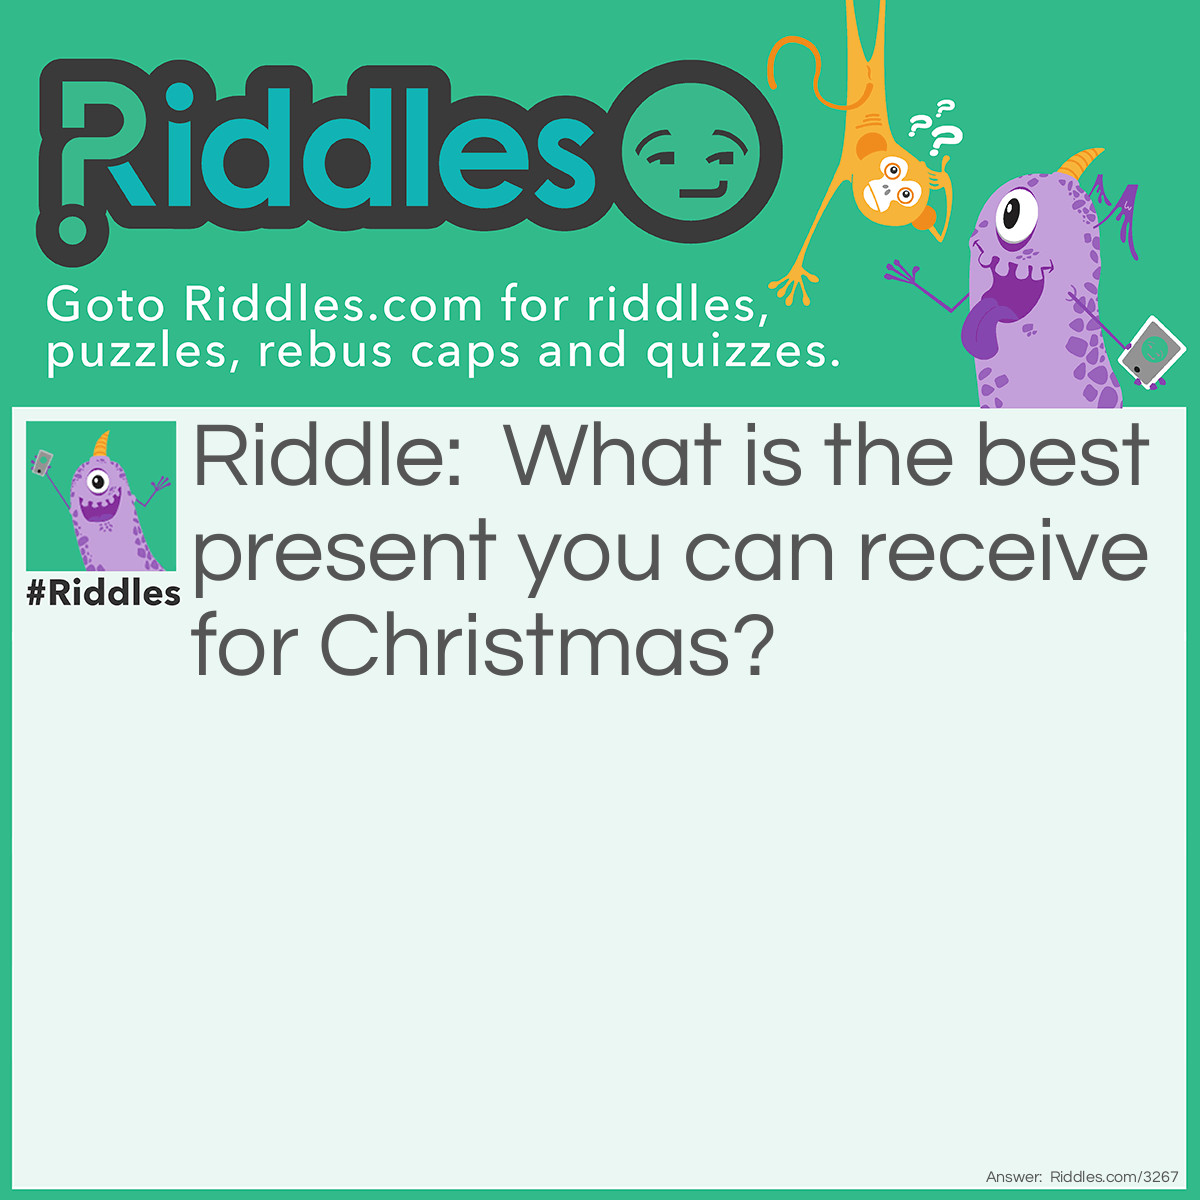 Riddle: What is the best present you can receive for <a href="https://www.riddles.com/quiz/christmas-riddles">Christmas</a>? Answer: A broken drum.  You just can't beat it!